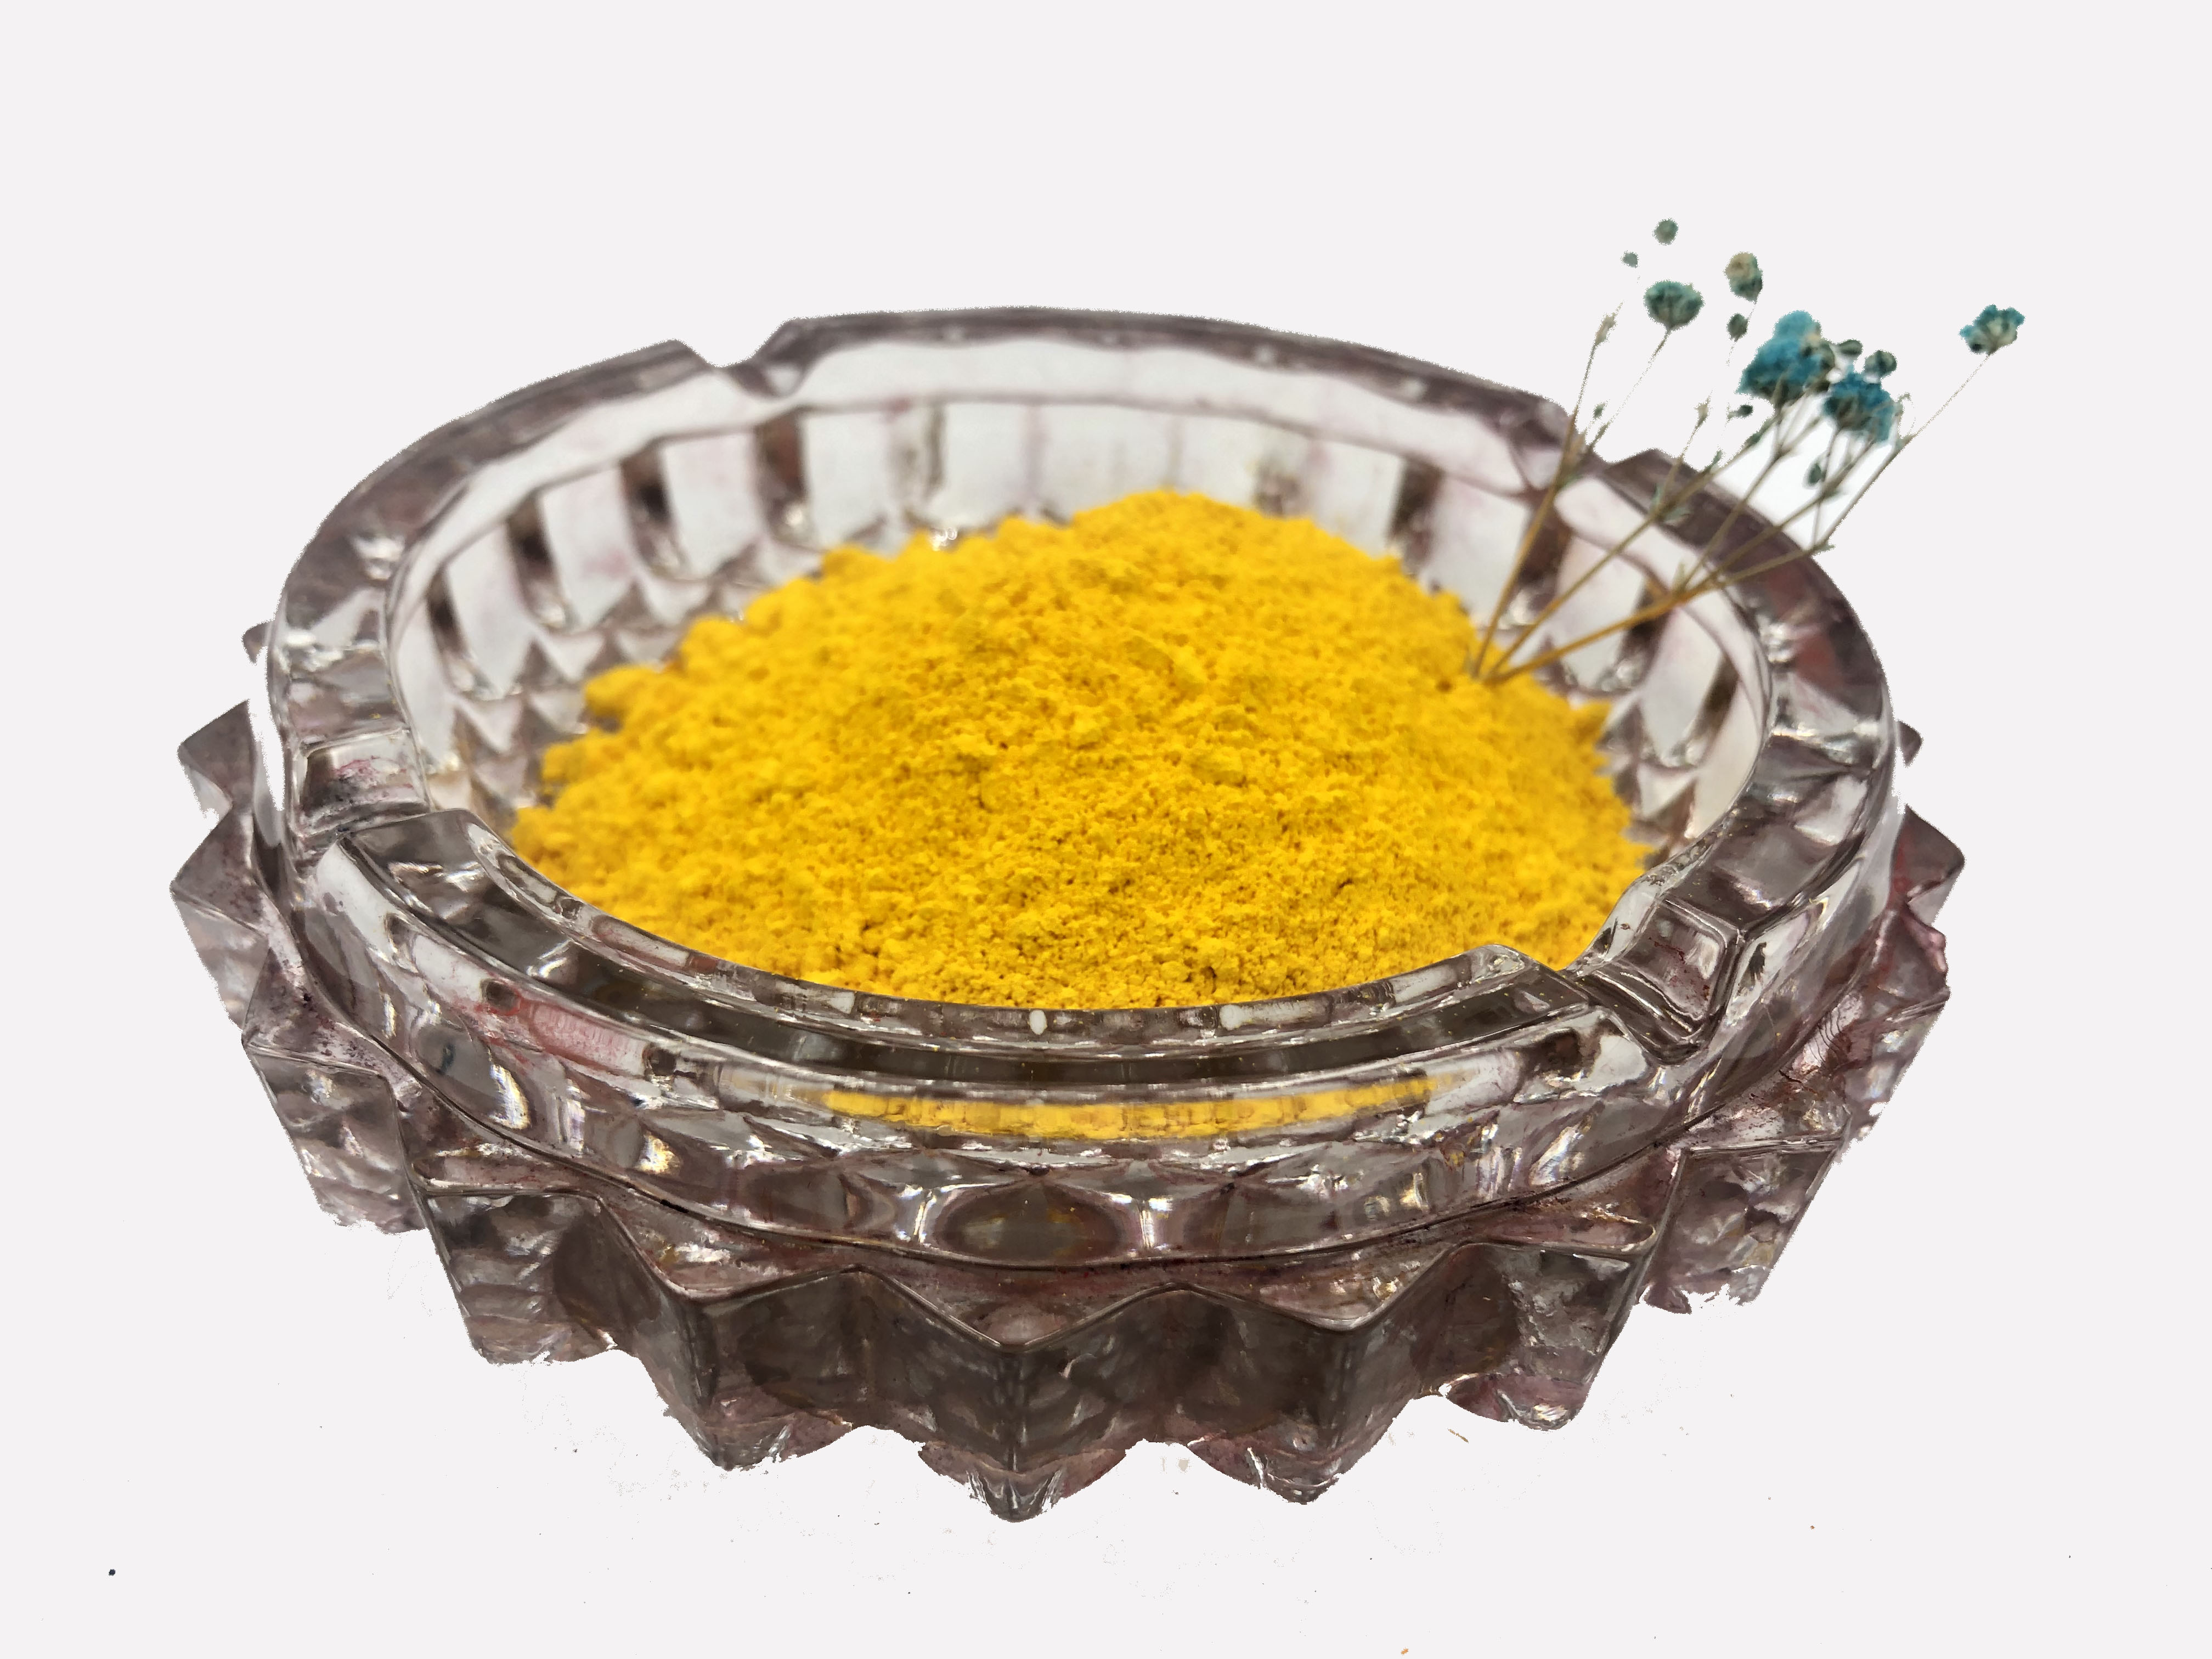 Yellow TPU Special Colorant Excellent Dispersion With High Sun Resistance And High Heat Resistance High coloring Strength